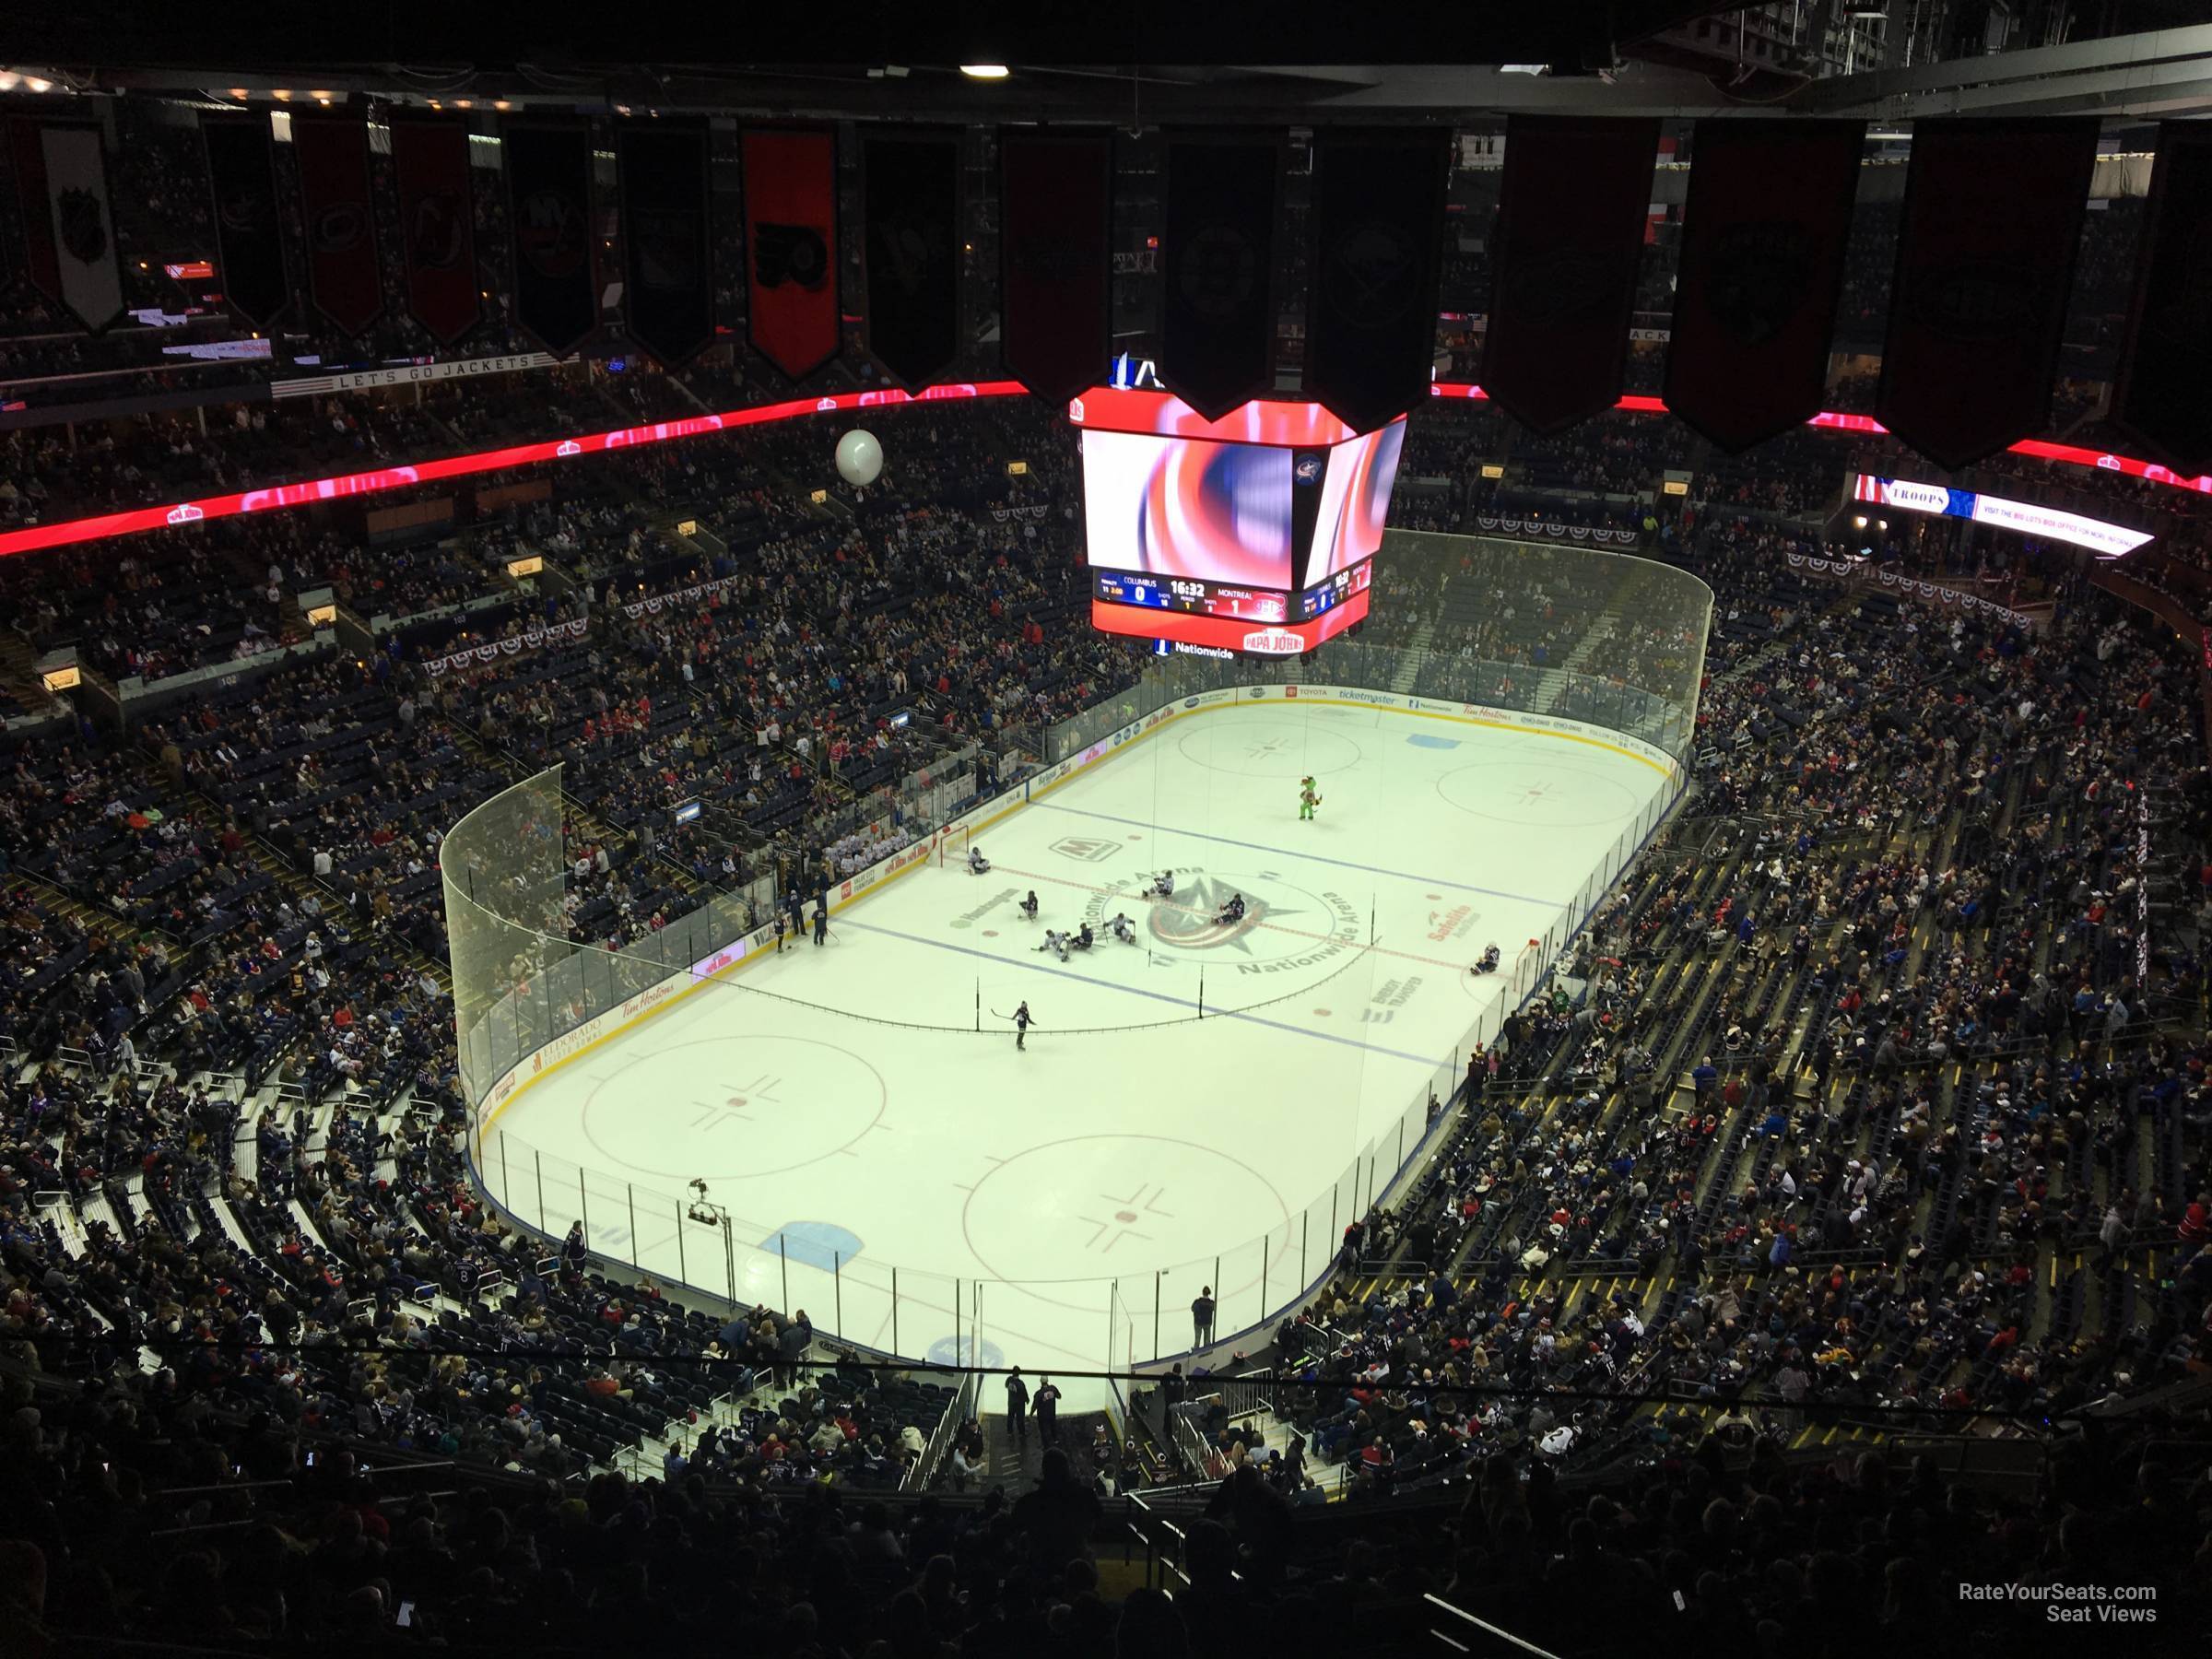 section 302, row a seat view  for hockey - nationwide arena